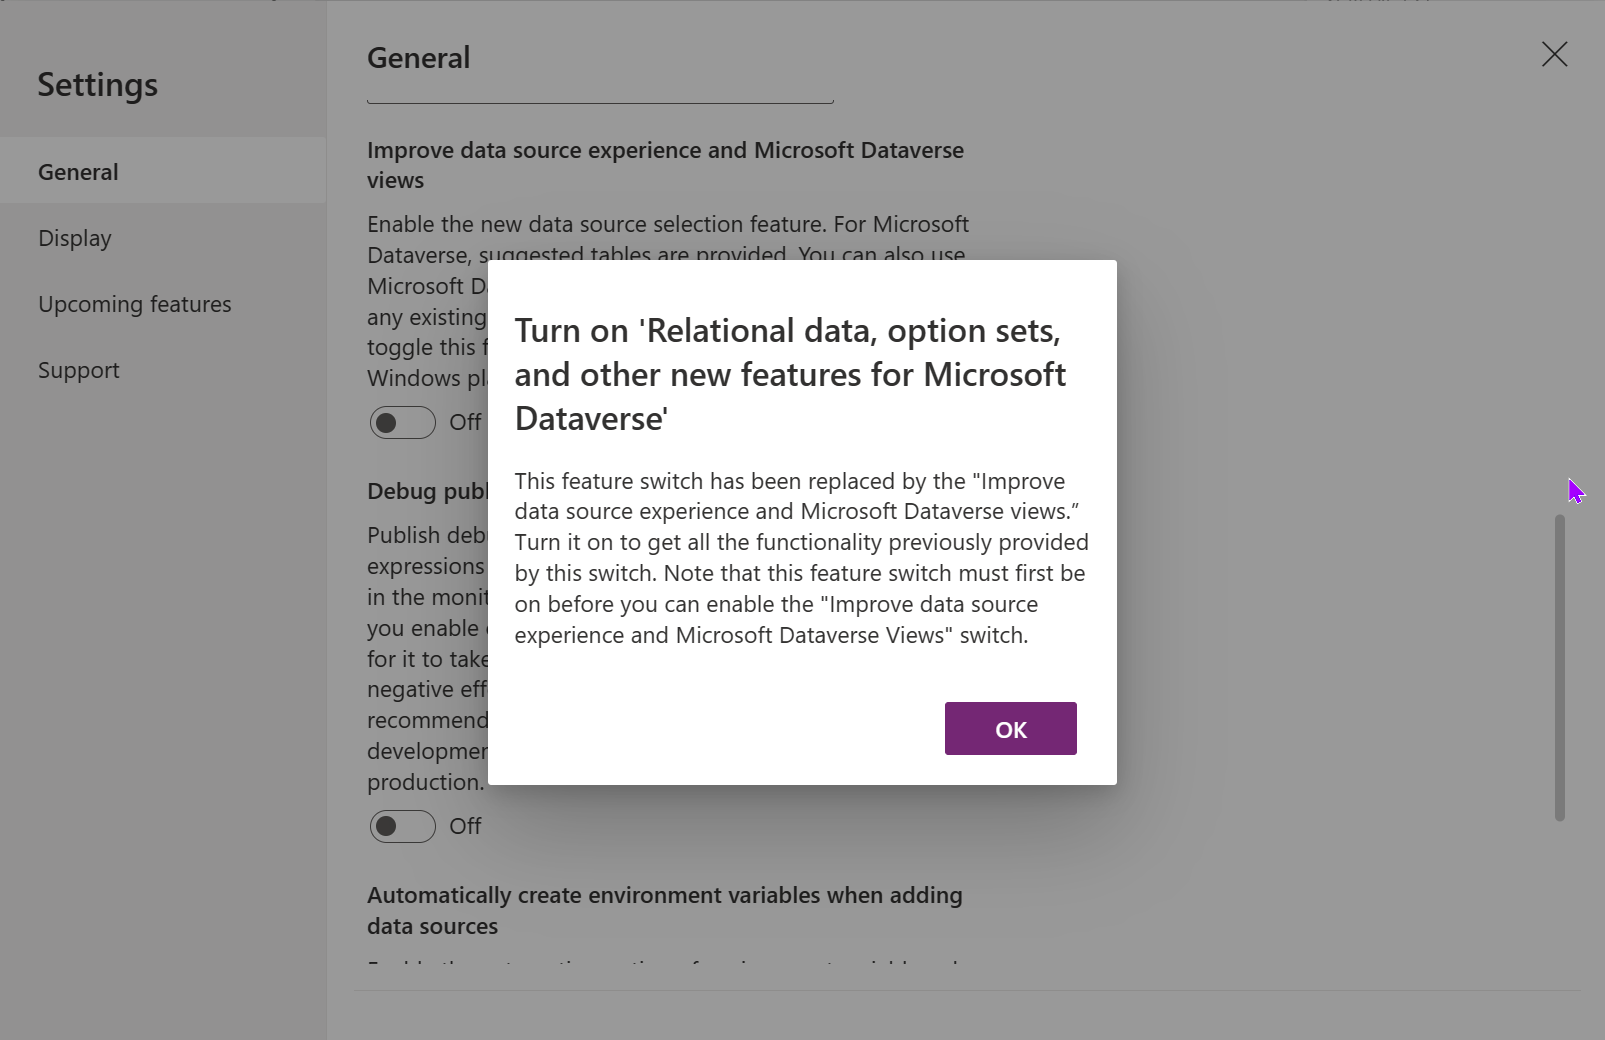 image displays a message that we need to turn on 'Relational data, option sets, and other new features for Microsoft Dataverse' before we can enable the 'Improved data source experience and Microsoft Dataverse views' feature flag